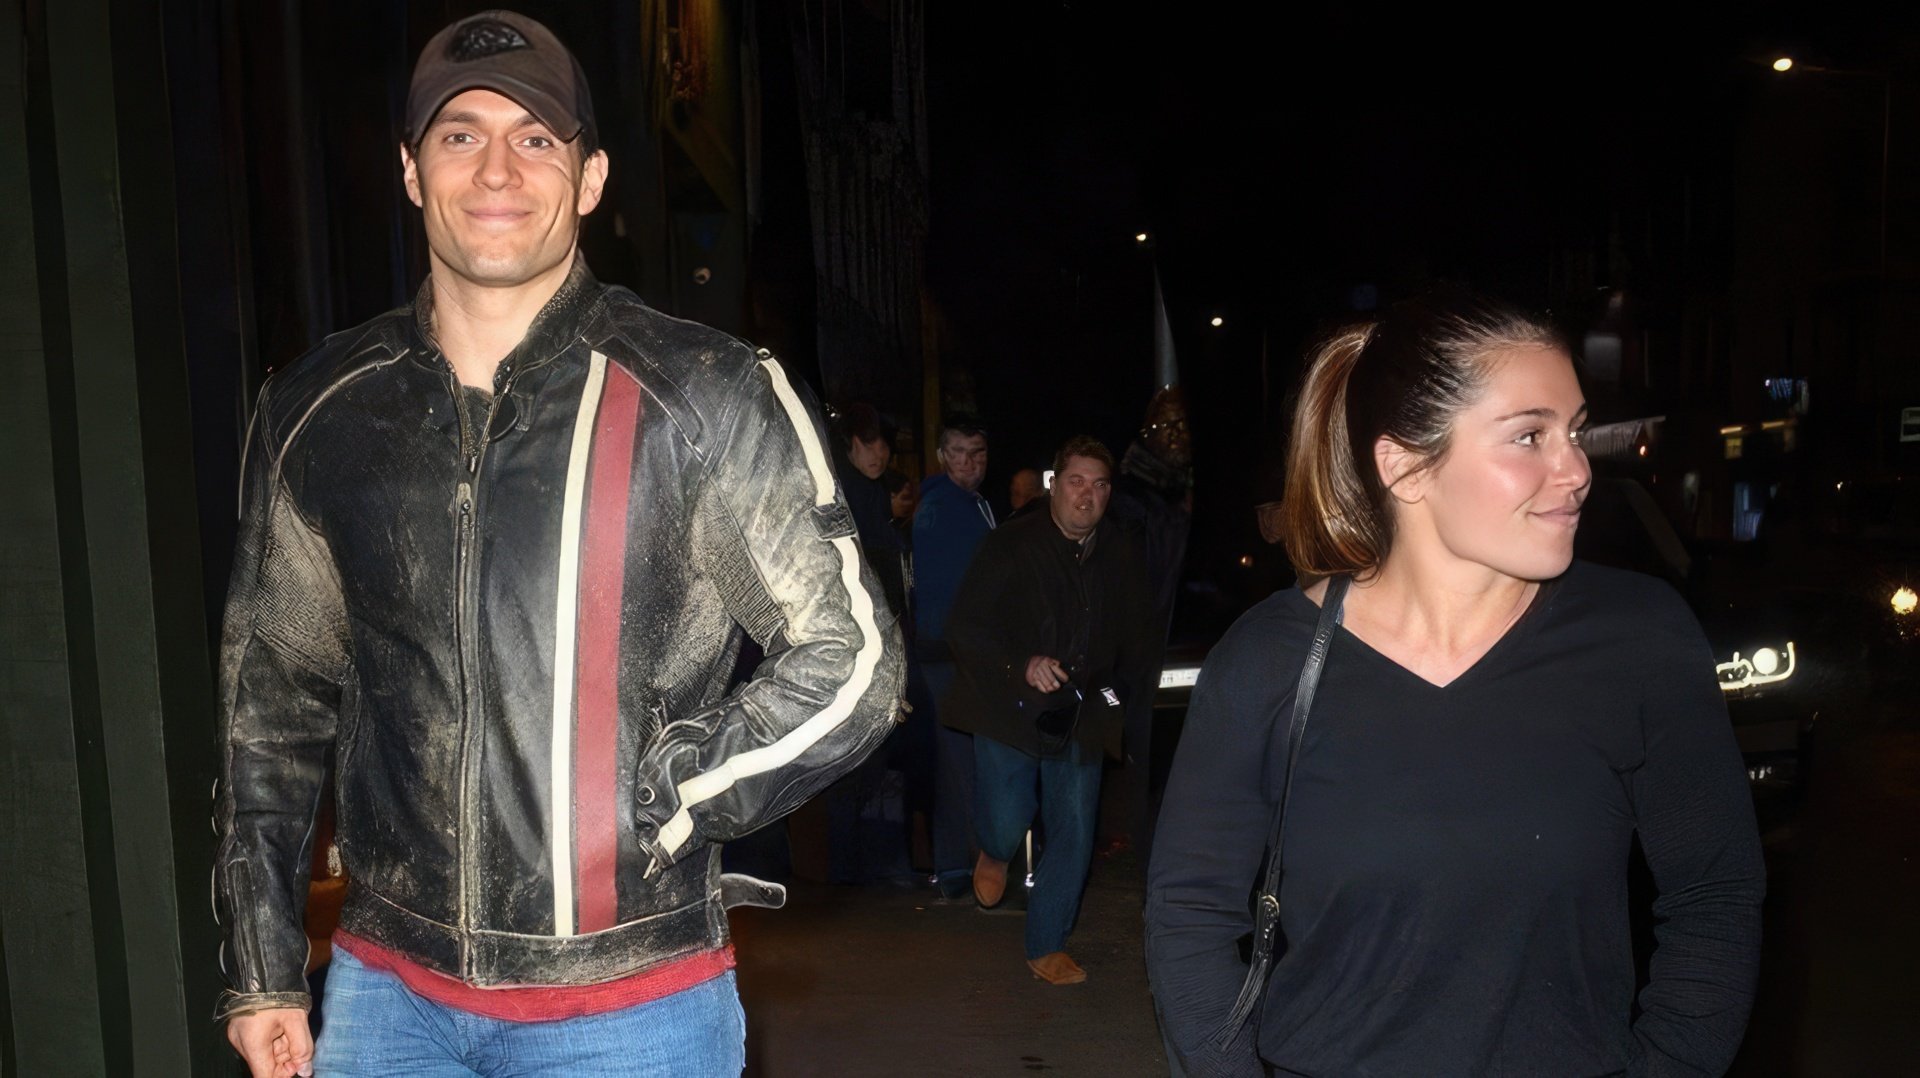 Cavill and his ex-girlfriend